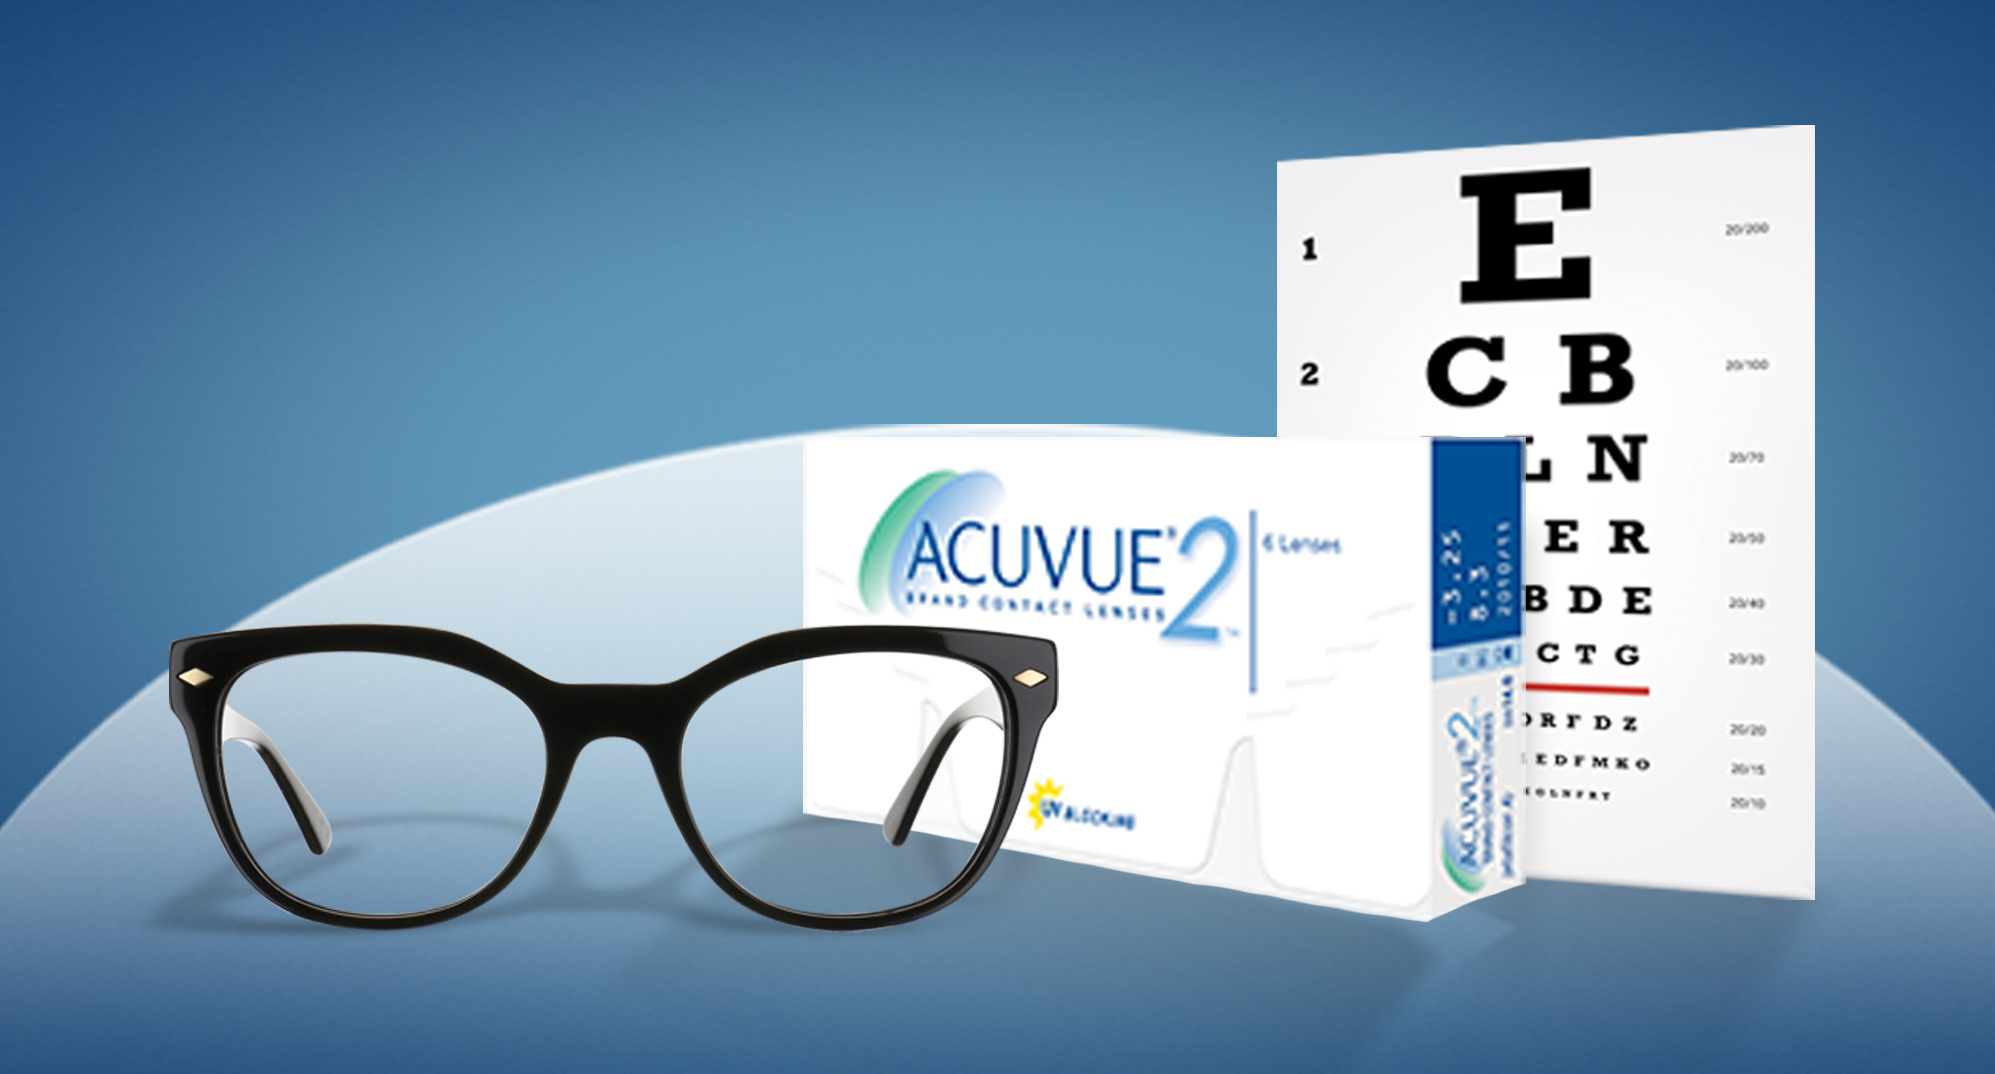 Glasses, contact lens box and Snellen chart